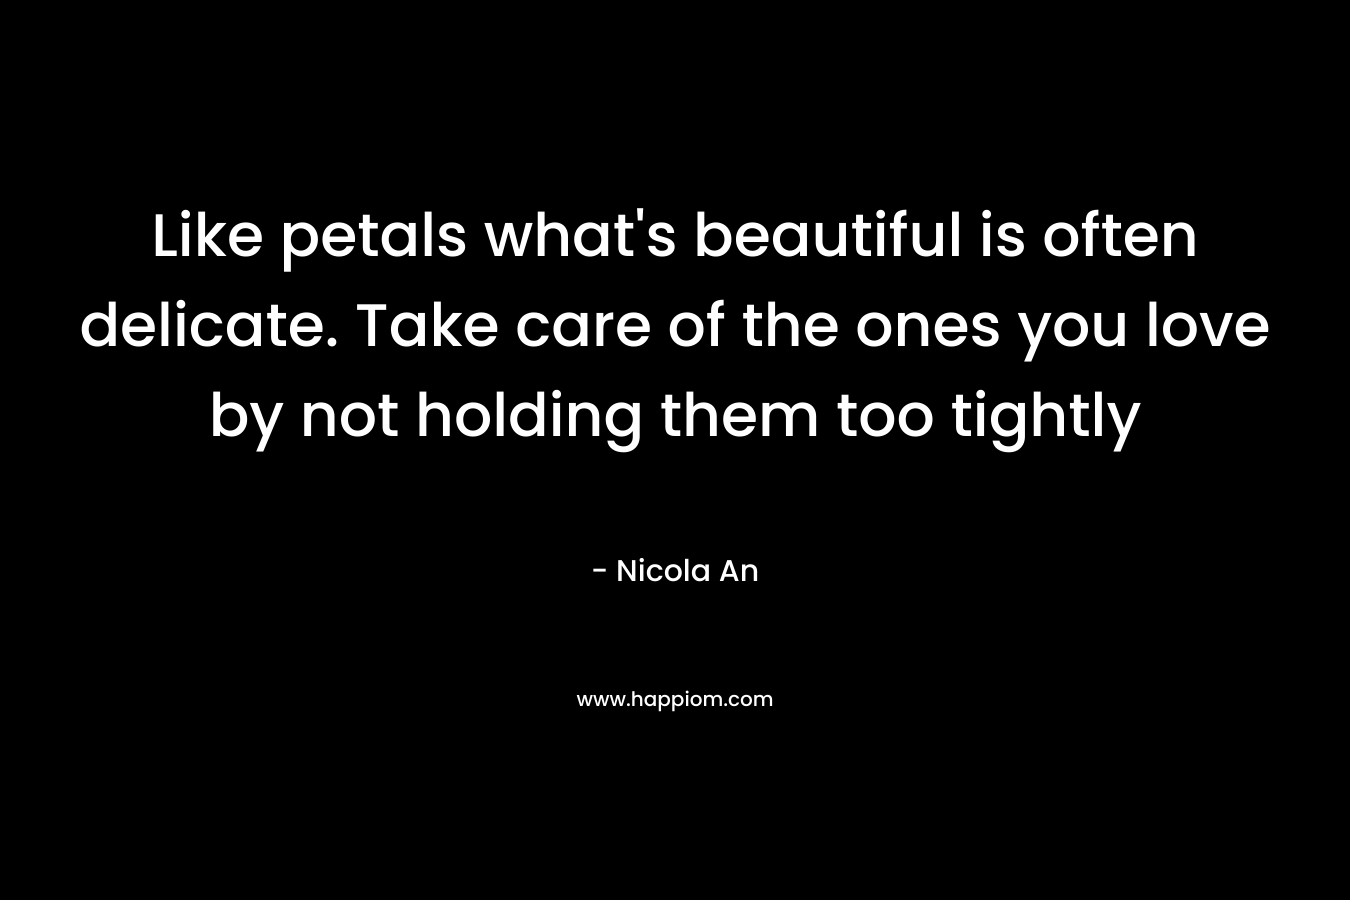 Like petals what's beautiful is often delicate. Take care of the ones you love by not holding them too tightly